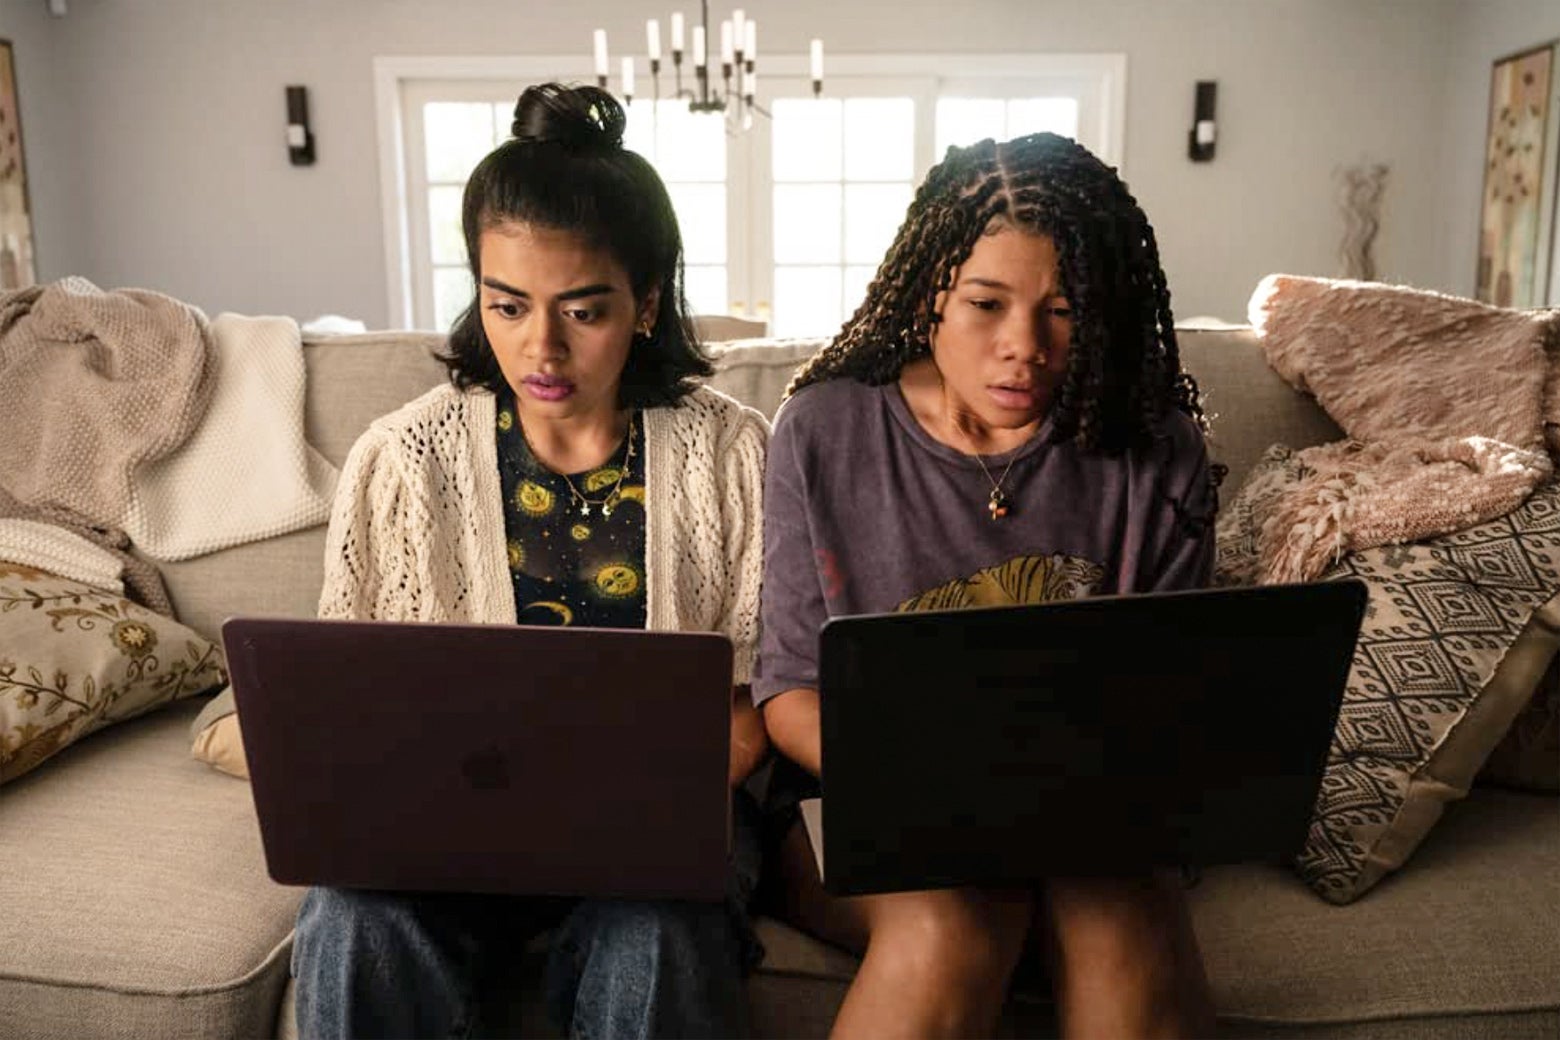 Two girls from the movie sit next to each other on a couch with laptops open and scared looks on their faces.